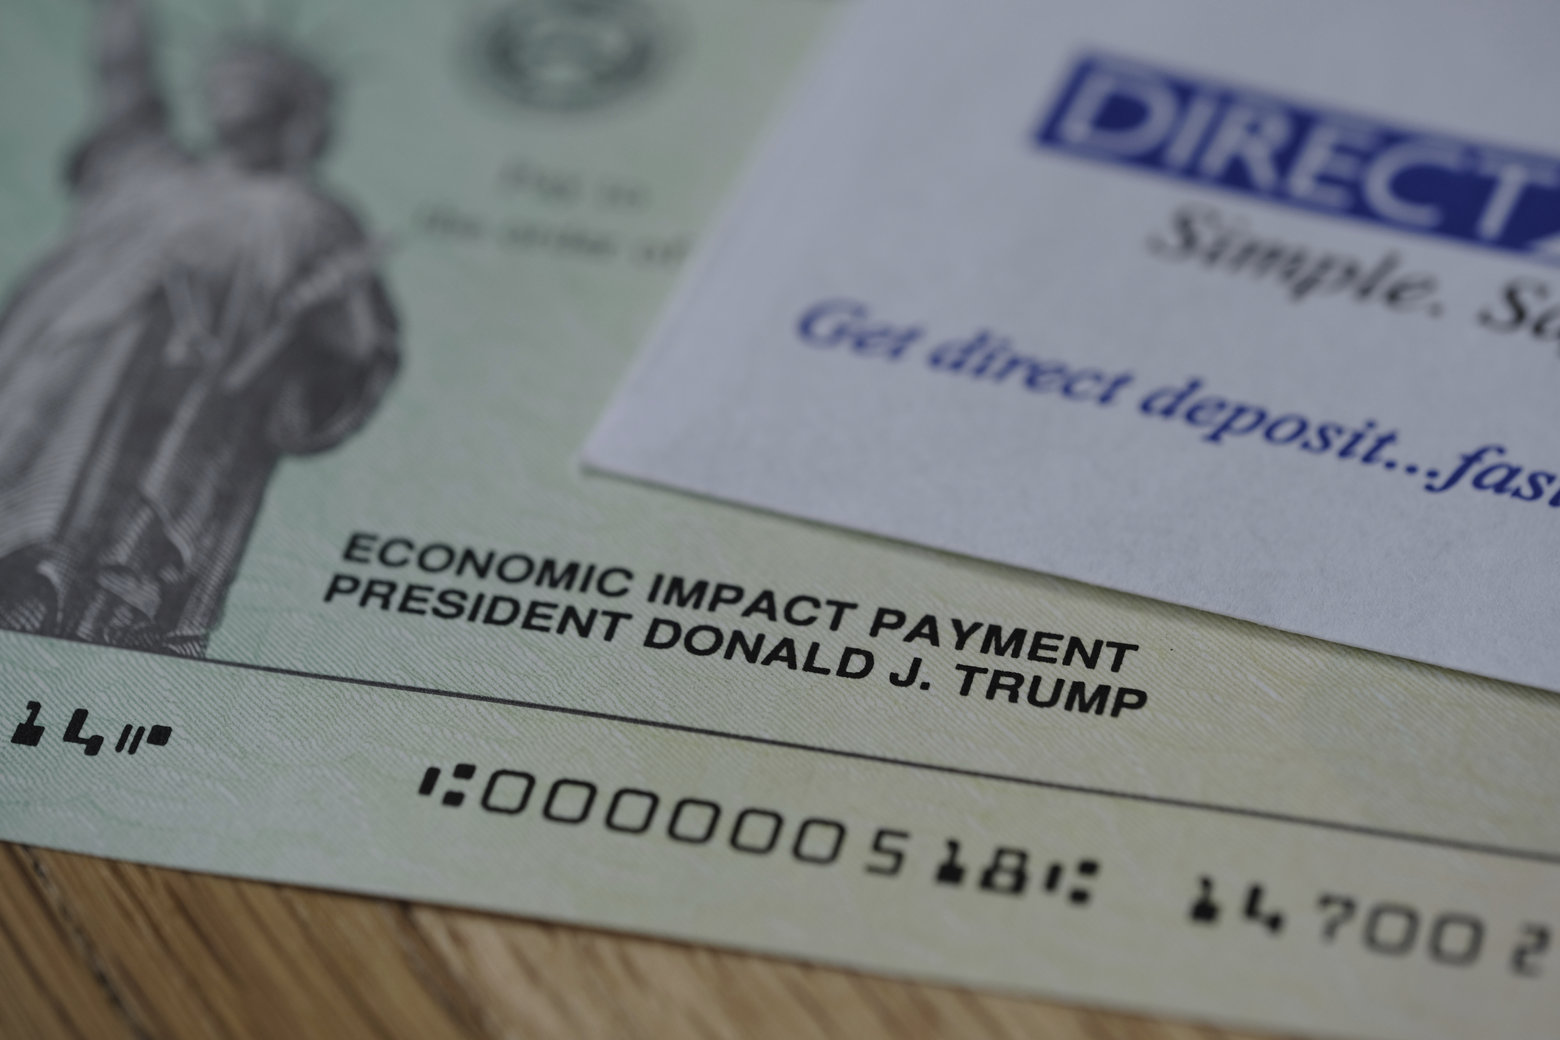 A lot more than 1,200 checks are coming in the new stimulus bill here’s what you need to know